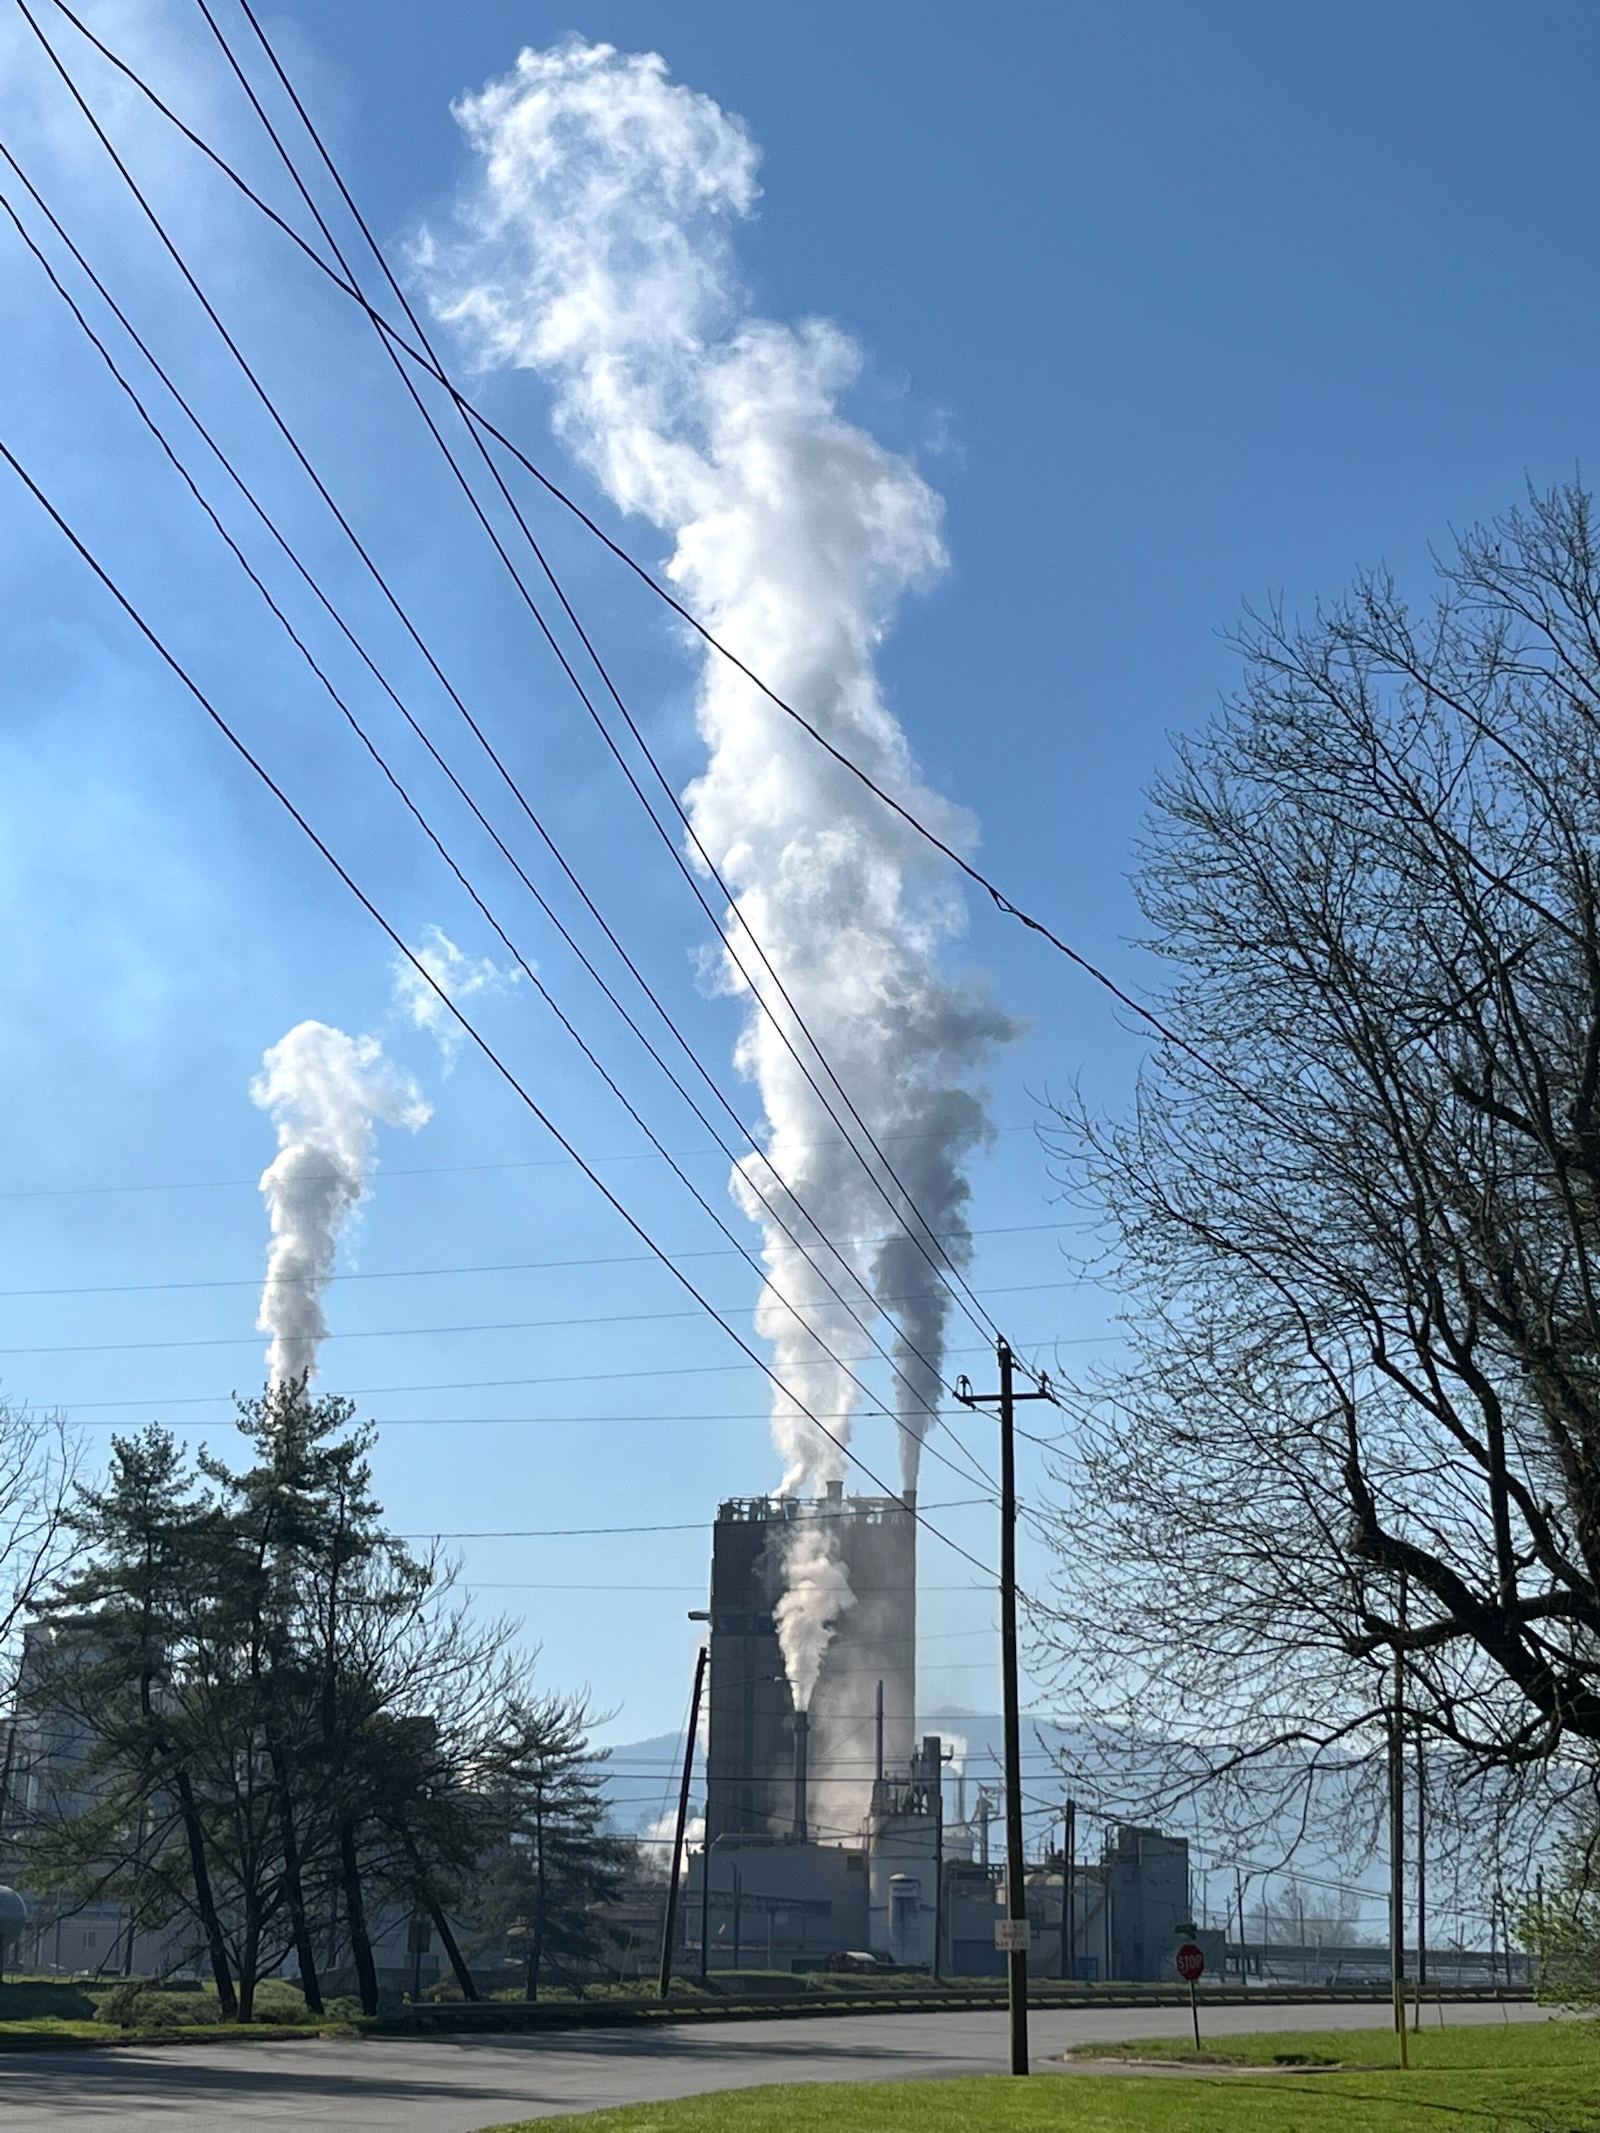 Large plumes of white smoke rise from the stacks to fill a blue sky above the paper mill in Canton, North Carolina.